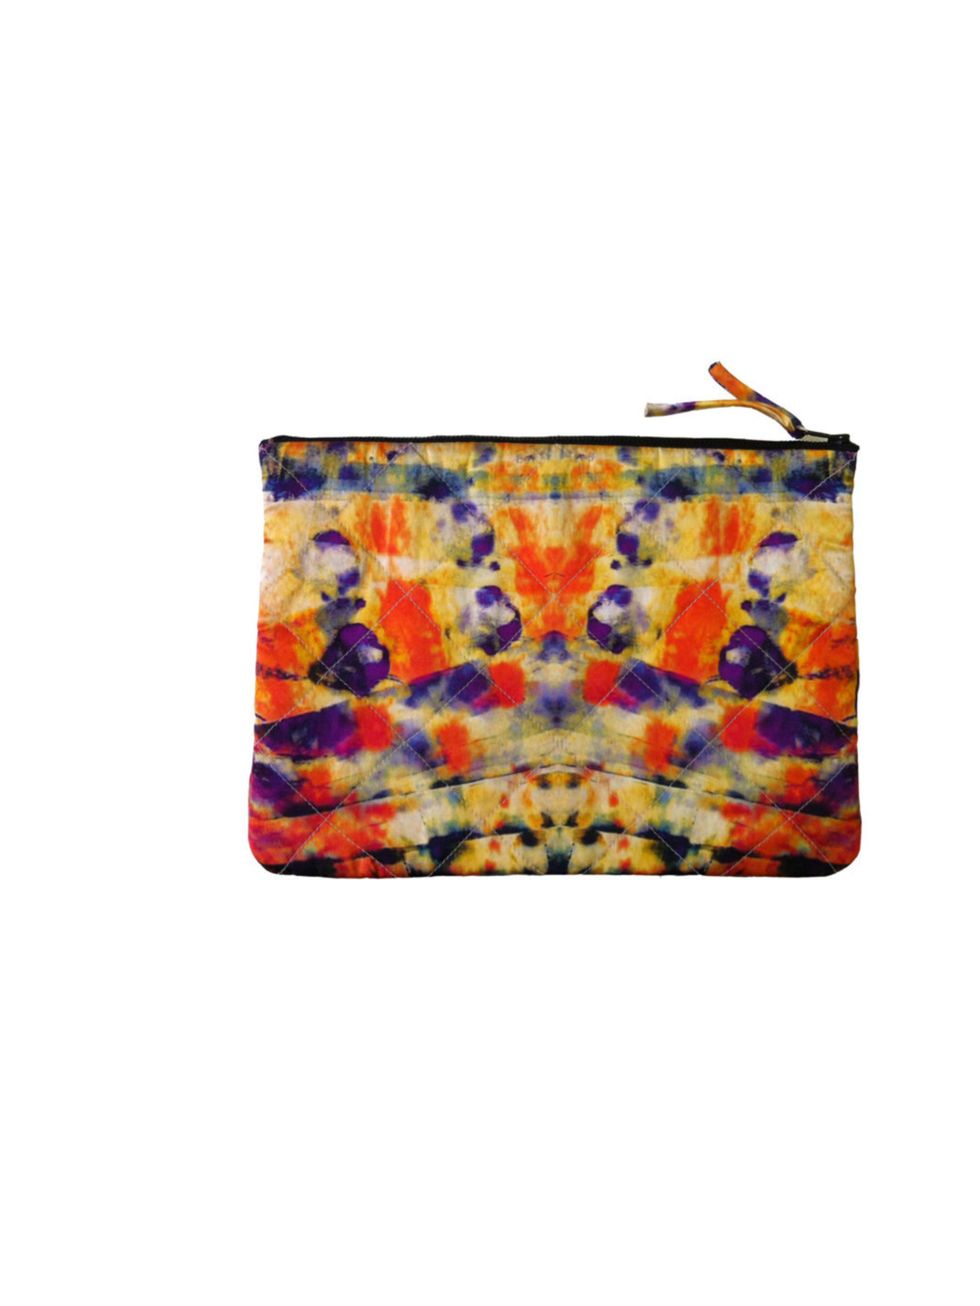 <p>As a clutch, iPad case or travel pouch, this silk number is just the ticket to take you through the coming season CC Kuo silk pouch, £60, at <a href="https://www.fenwick.co.uk/">Fenwick</a></p>